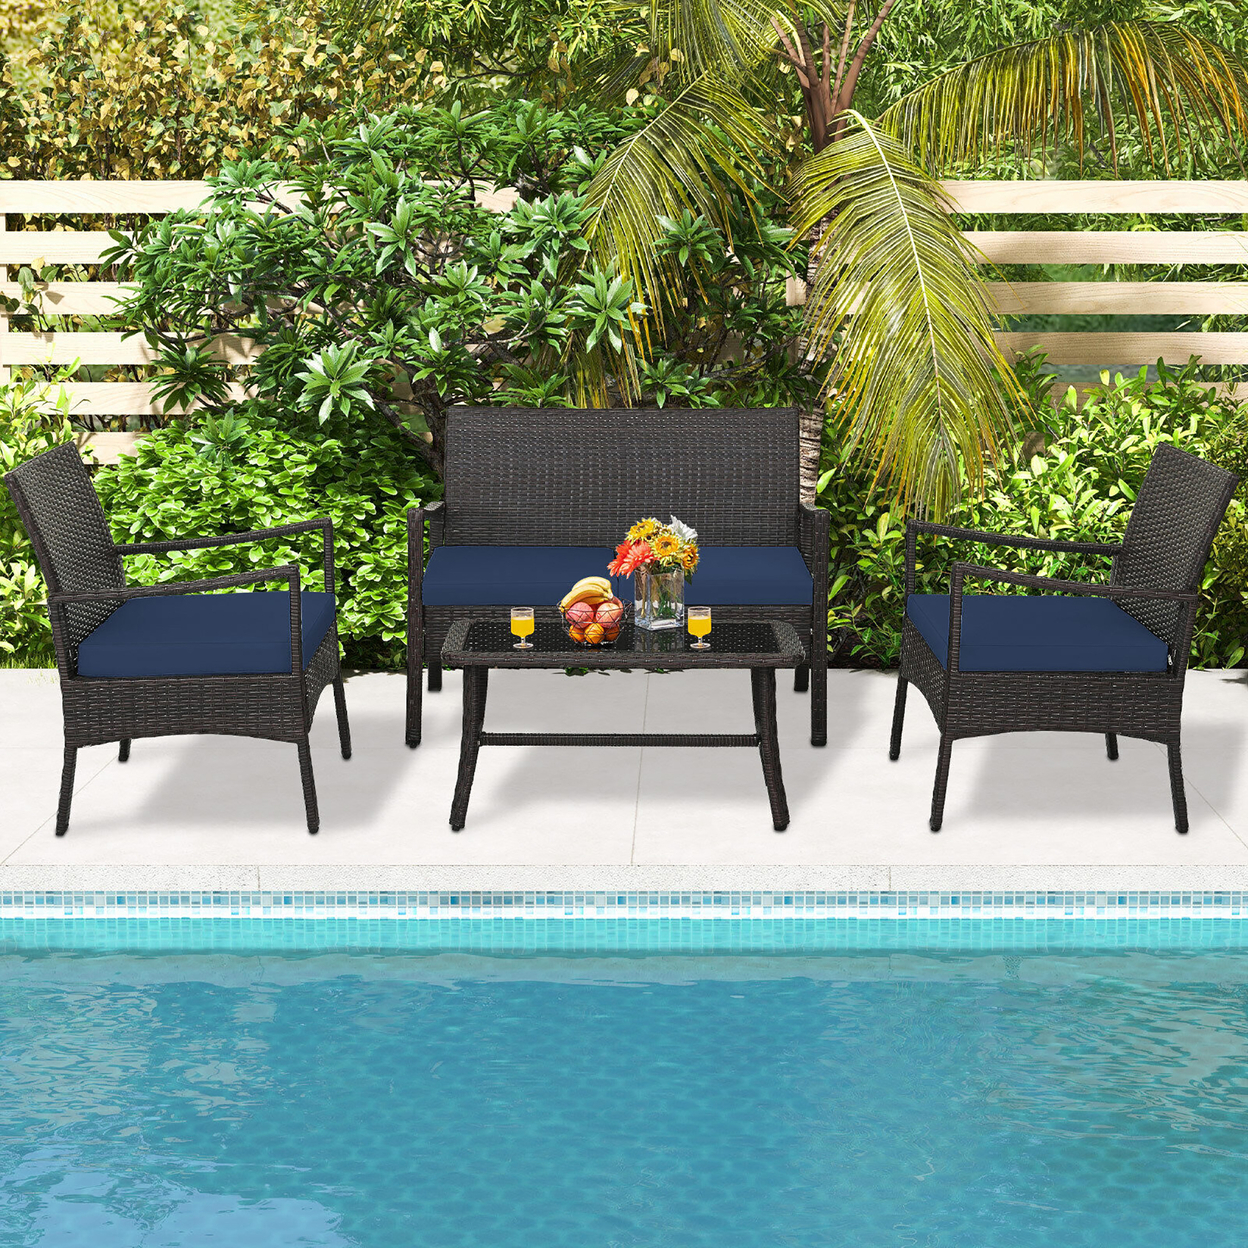 4 Pieces Outdoor Patio PE Wicker Sofa W/ Tempered Glass Coffee Table For Porch & Backyard